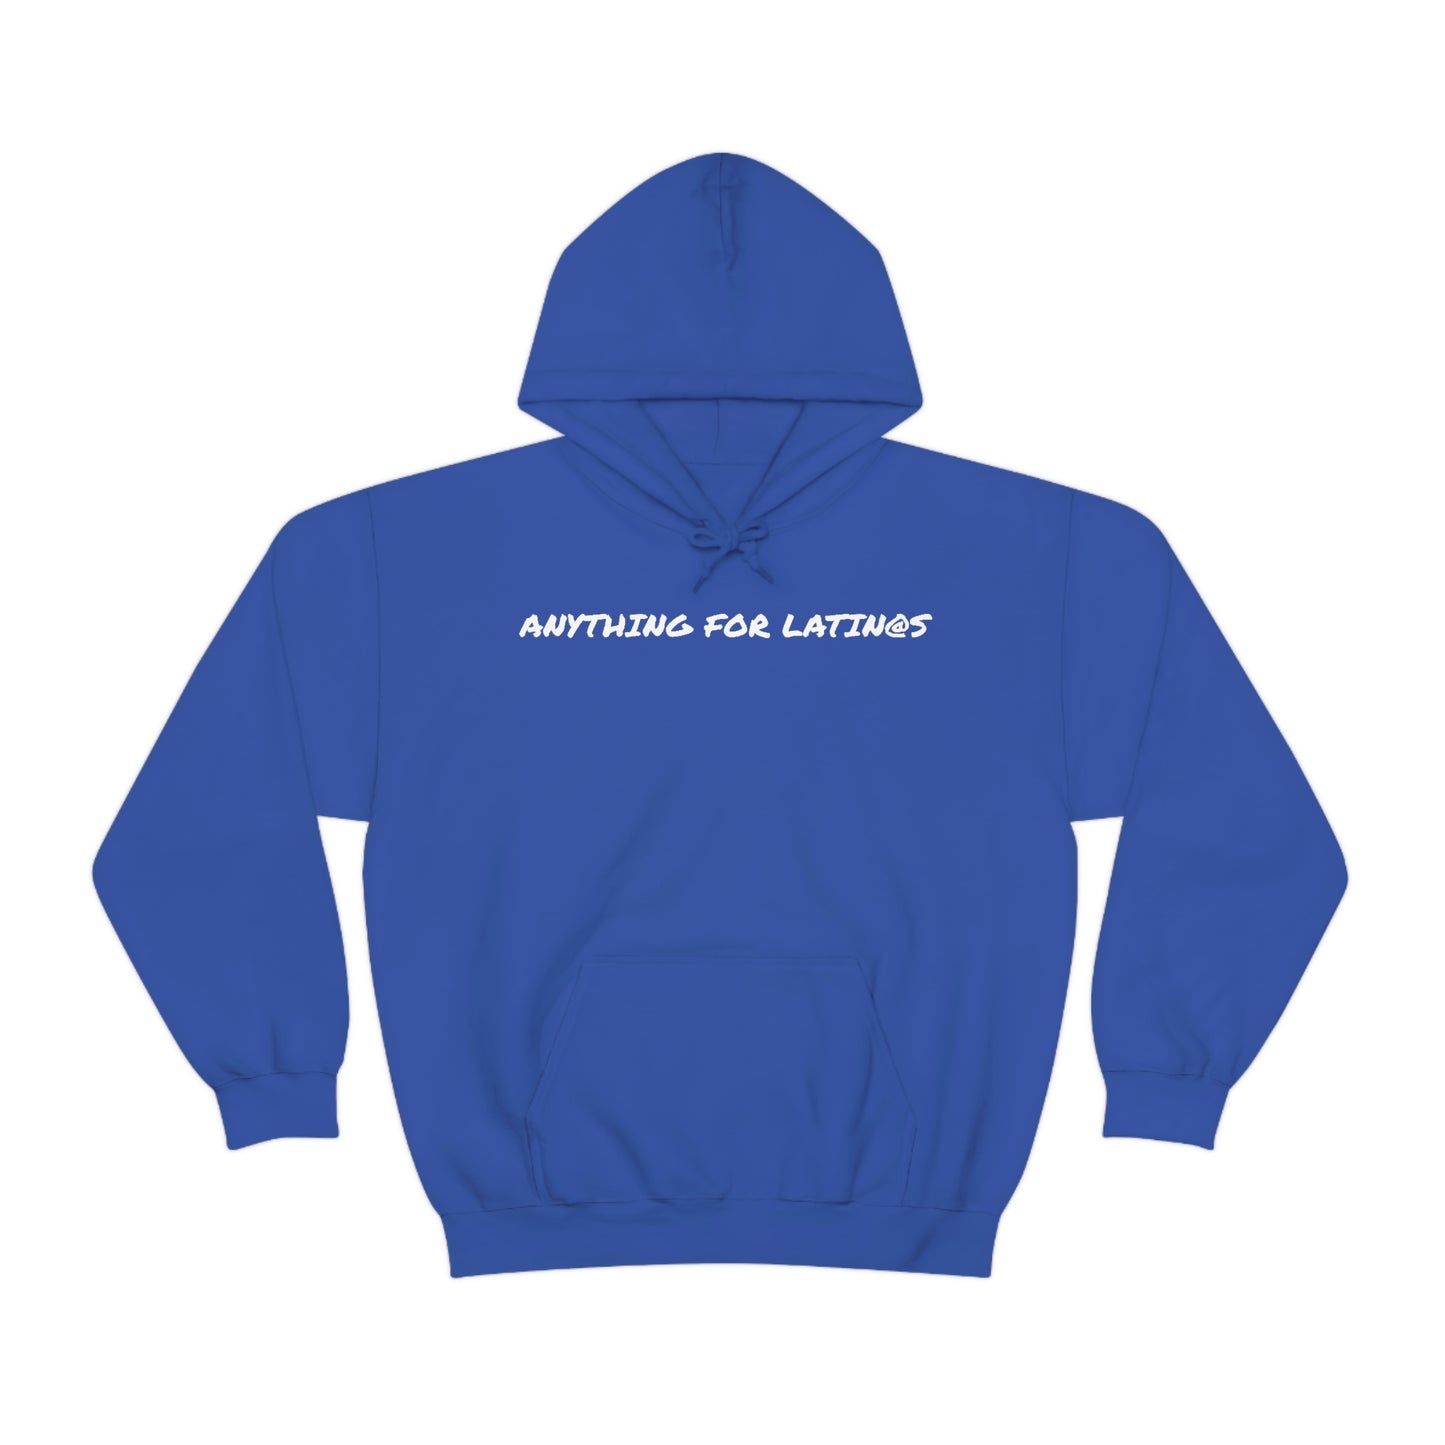 ANYTHING FOR LATIN@S Unisex Heavy Blend™ Hooded Sweatshirt